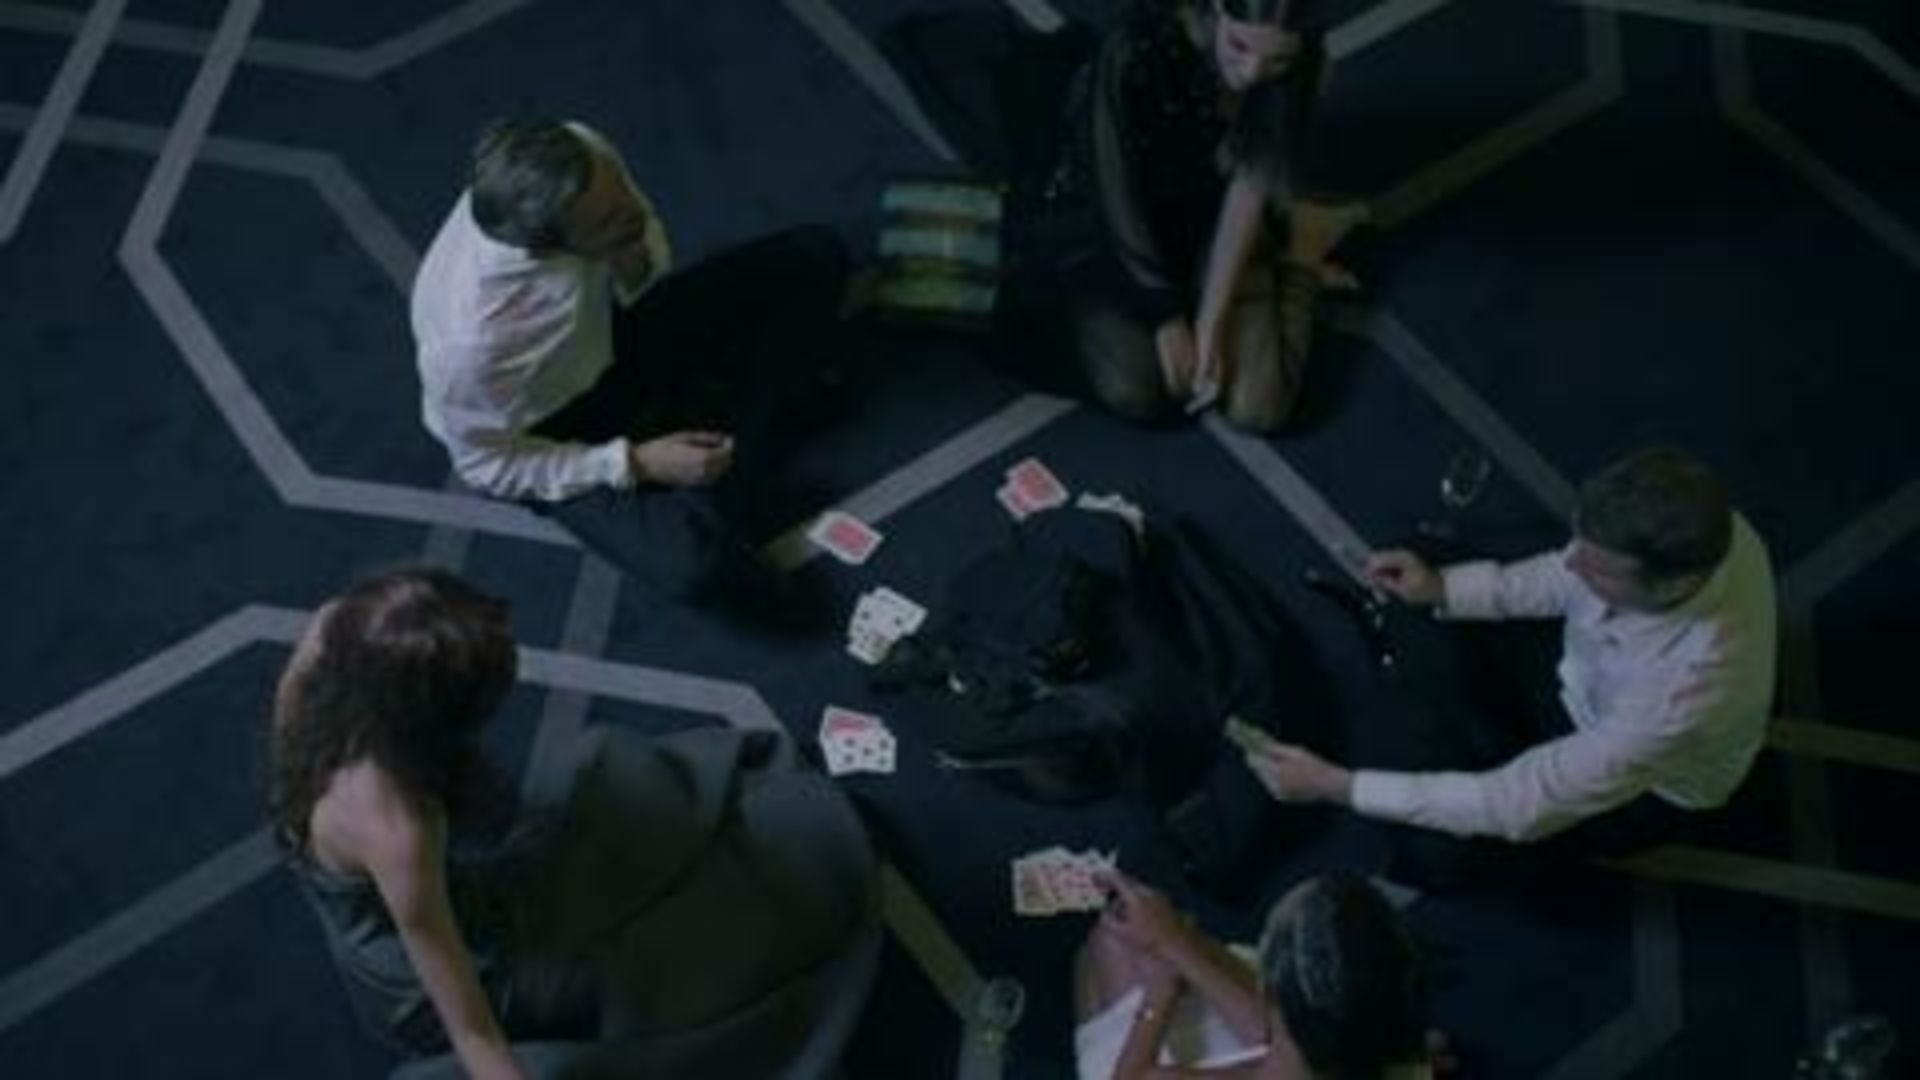 All In A Fashionable Game of Strip Poker